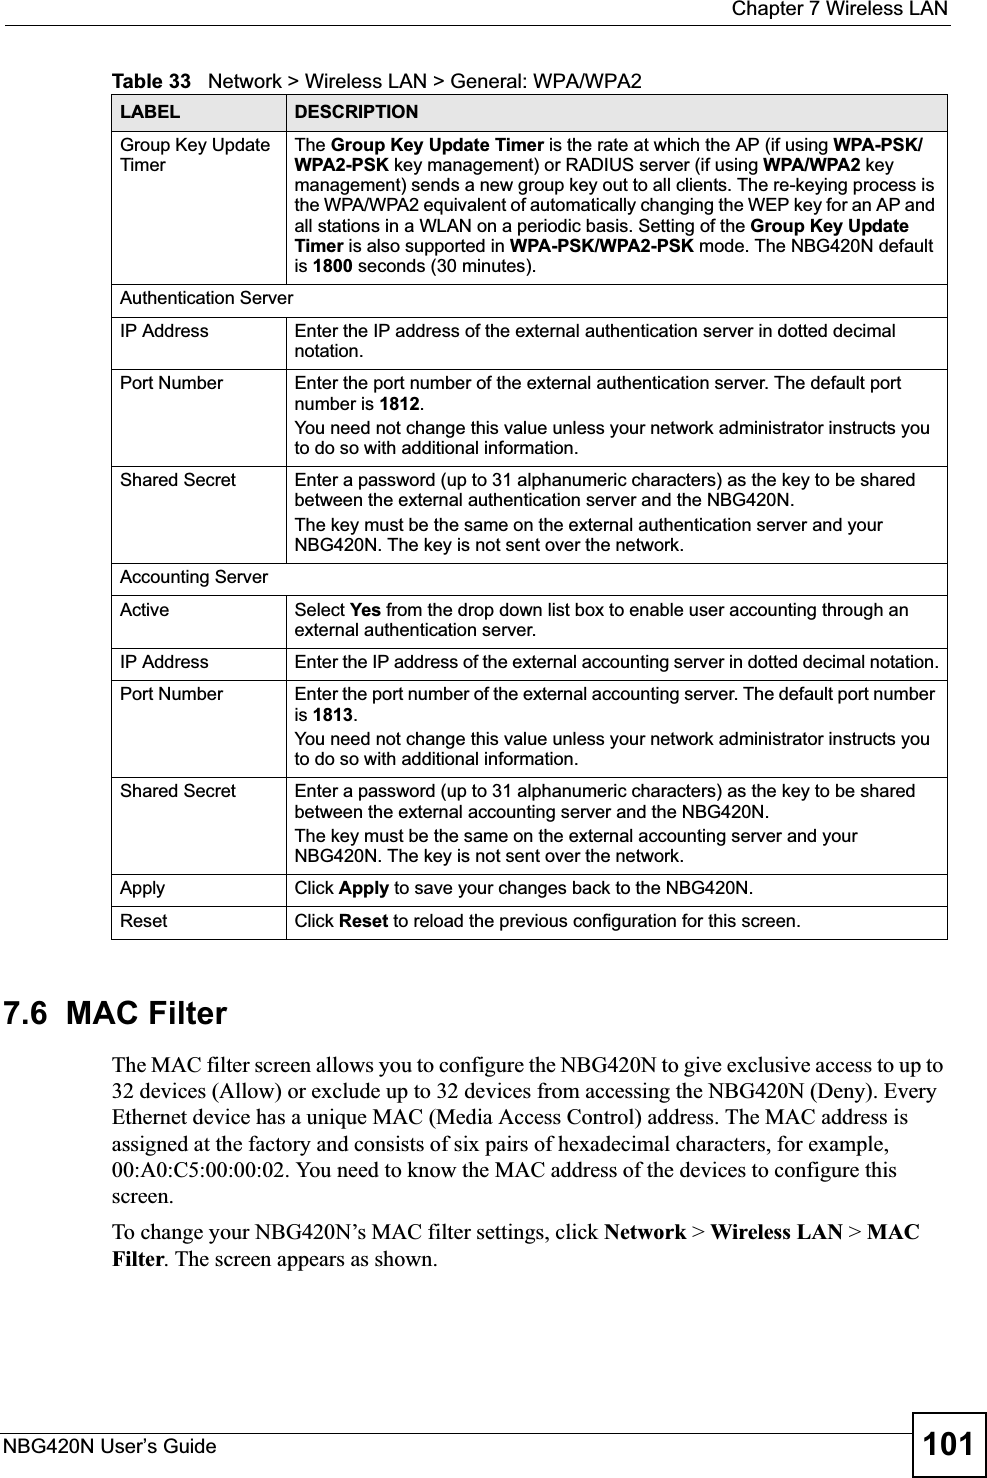  Chapter 7 Wireless LANNBG420N User’s Guide 1017.6  MAC FilterThe MAC filter screen allows you to configure the NBG420N to give exclusive access to up to 32 devices (Allow) or exclude up to 32 devices from accessing the NBG420N (Deny). Every Ethernet device has a unique MAC (Media Access Control) address. The MAC address is assigned at the factory and consists of six pairs of hexadecimal characters, for example, 00:A0:C5:00:00:02. You need to know the MAC address of the devices to configure this screen.To change your NBG420N’s MAC filter settings, click Network &gt; Wireless LAN &gt; MACFilter. The screen appears as shown.Group Key Update TimerThe Group Key Update Timer is the rate at which the AP (if using WPA-PSK/WPA2-PSK key management) or RADIUS server (if using WPA/WPA2 key management) sends a new group key out to all clients. The re-keying process is the WPA/WPA2 equivalent of automatically changing the WEP key for an AP and all stations in a WLAN on a periodic basis. Setting of the Group Key Update Timer is also supported in WPA-PSK/WPA2-PSK mode. The NBG420N default is 1800 seconds (30 minutes).Authentication ServerIP Address Enter the IP address of the external authentication server in dotted decimal notation.Port Number Enter the port number of the external authentication server. The default port number is 1812.You need not change this value unless your network administrator instructs you to do so with additional information. Shared Secret Enter a password (up to 31 alphanumeric characters) as the key to be shared between the external authentication server and the NBG420N.The key must be the same on the external authentication server and your NBG420N. The key is not sent over the network. Accounting ServerActive Select Yes from the drop down list box to enable user accounting through an external authentication server.IP Address Enter the IP address of the external accounting server in dotted decimal notation.Port Number Enter the port number of the external accounting server. The default port number is 1813.You need not change this value unless your network administrator instructs you to do so with additional information. Shared Secret Enter a password (up to 31 alphanumeric characters) as the key to be shared between the external accounting server and the NBG420N.The key must be the same on the external accounting server and your NBG420N. The key is not sent over the network. Apply Click Apply to save your changes back to the NBG420N.Reset Click Reset to reload the previous configuration for this screen.Table 33   Network &gt; Wireless LAN &gt; General: WPA/WPA2LABEL DESCRIPTION